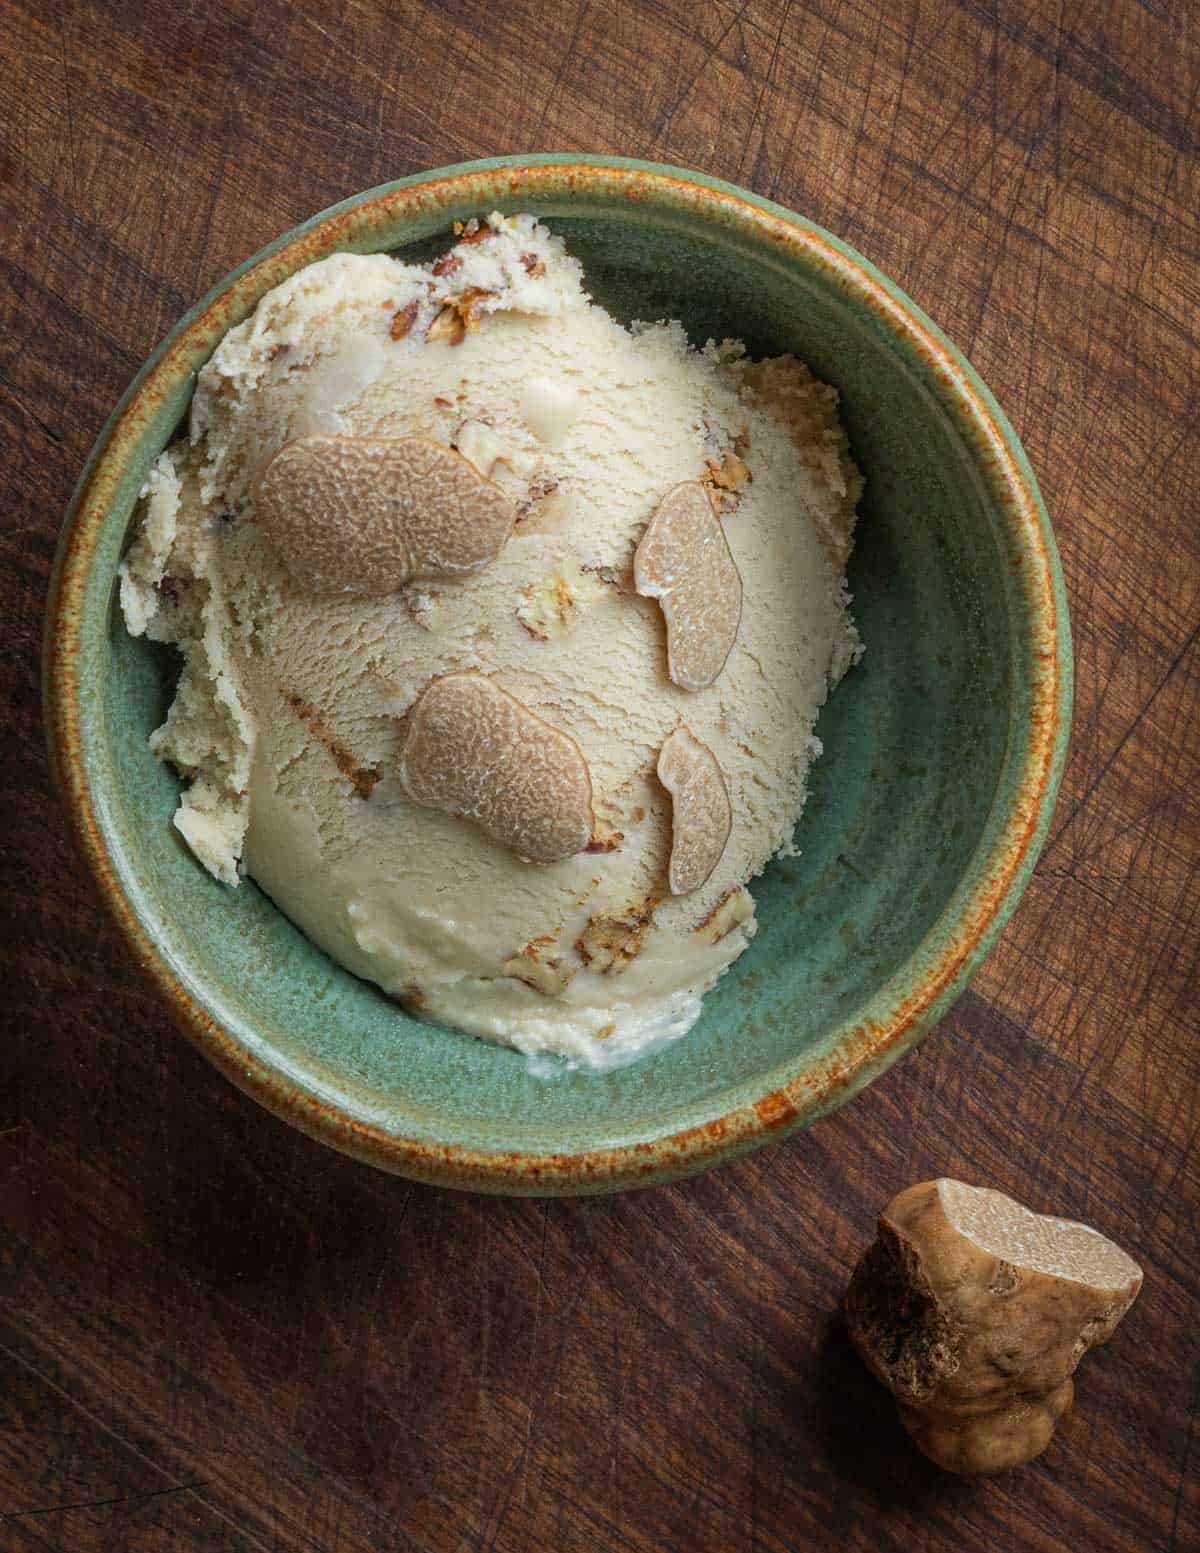 A green ceramic bowl with a scoop of truffle ice cream garnished with fresh sliced truffle mushrooms.